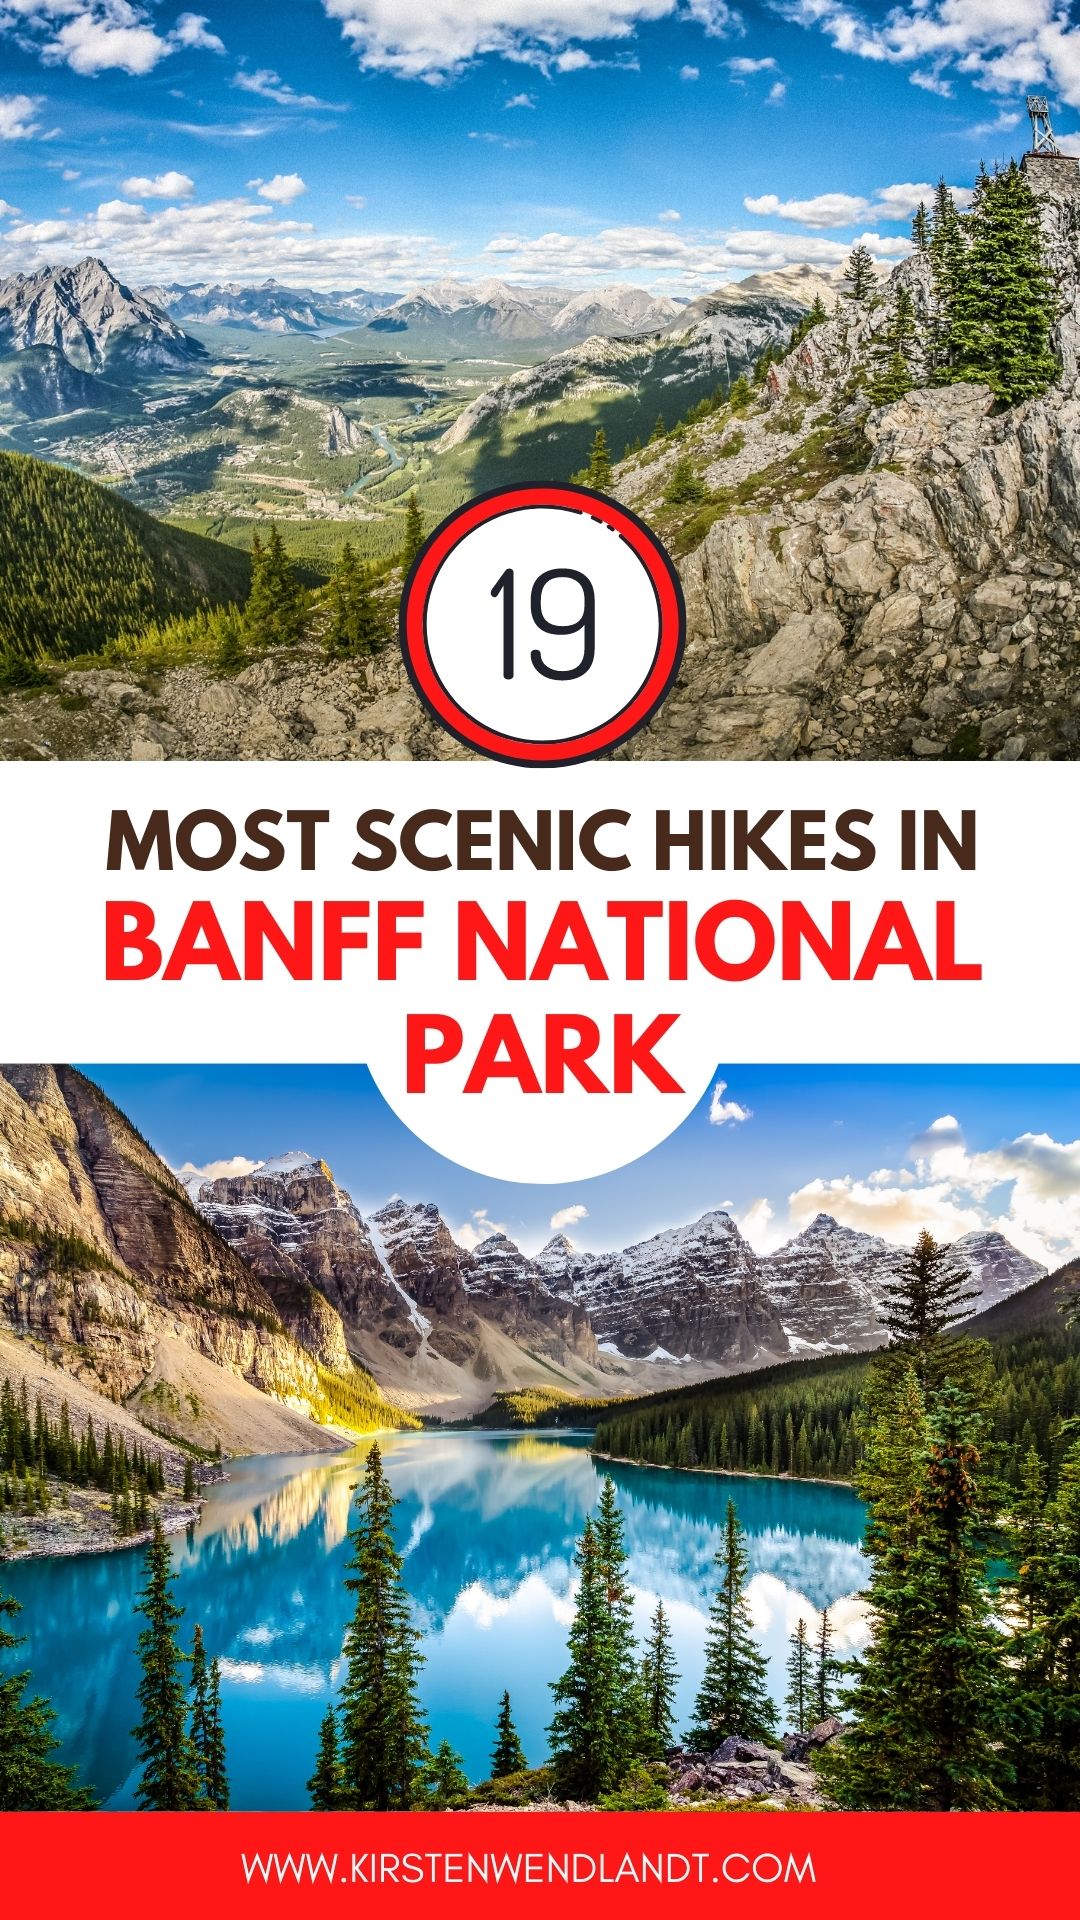 Banff National Park has some pretty incredible hikes. In fact, did you know that there are 150 hard trails in Banff National Park? With those kinds of numbers of course it can be difficult to narrow down exactly which hike you want to do when visiting Banff. To make things easier for you I’ve combined this list of some of the best hikes in Banff National Park and I’ve divided them by skill level. Pictured here: Ha Ling Peak